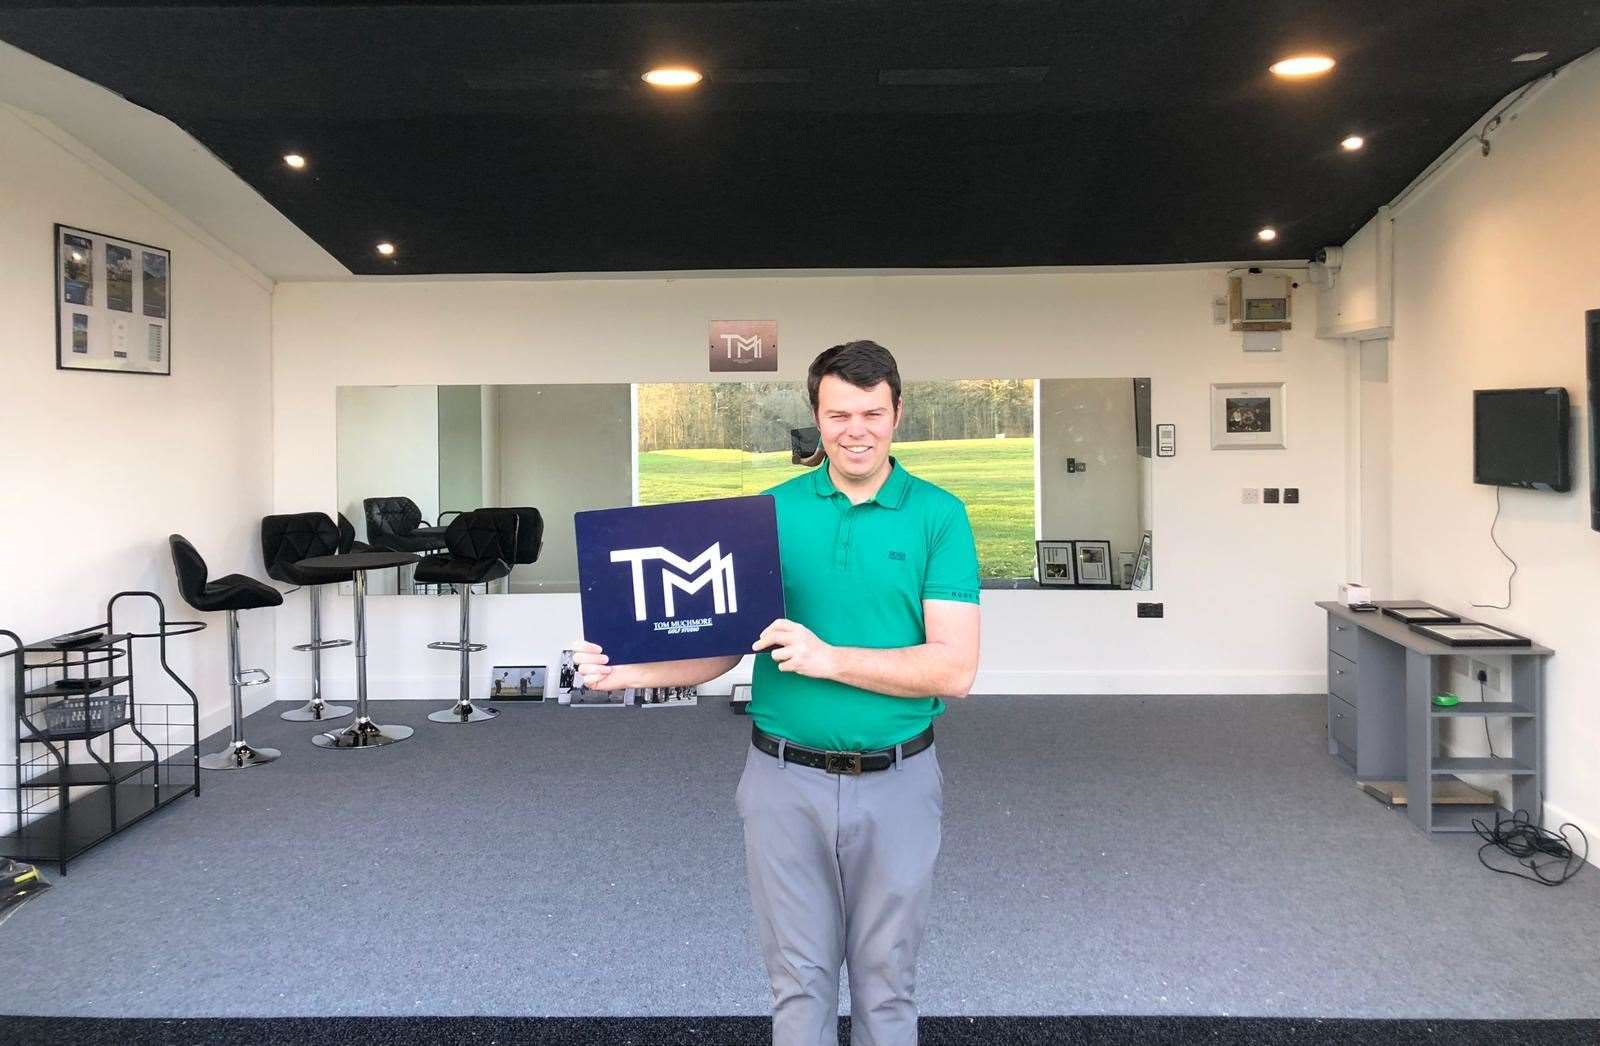 Tom Muchmore welcomed members back to the golf club this week and was excited to shown them his new studio